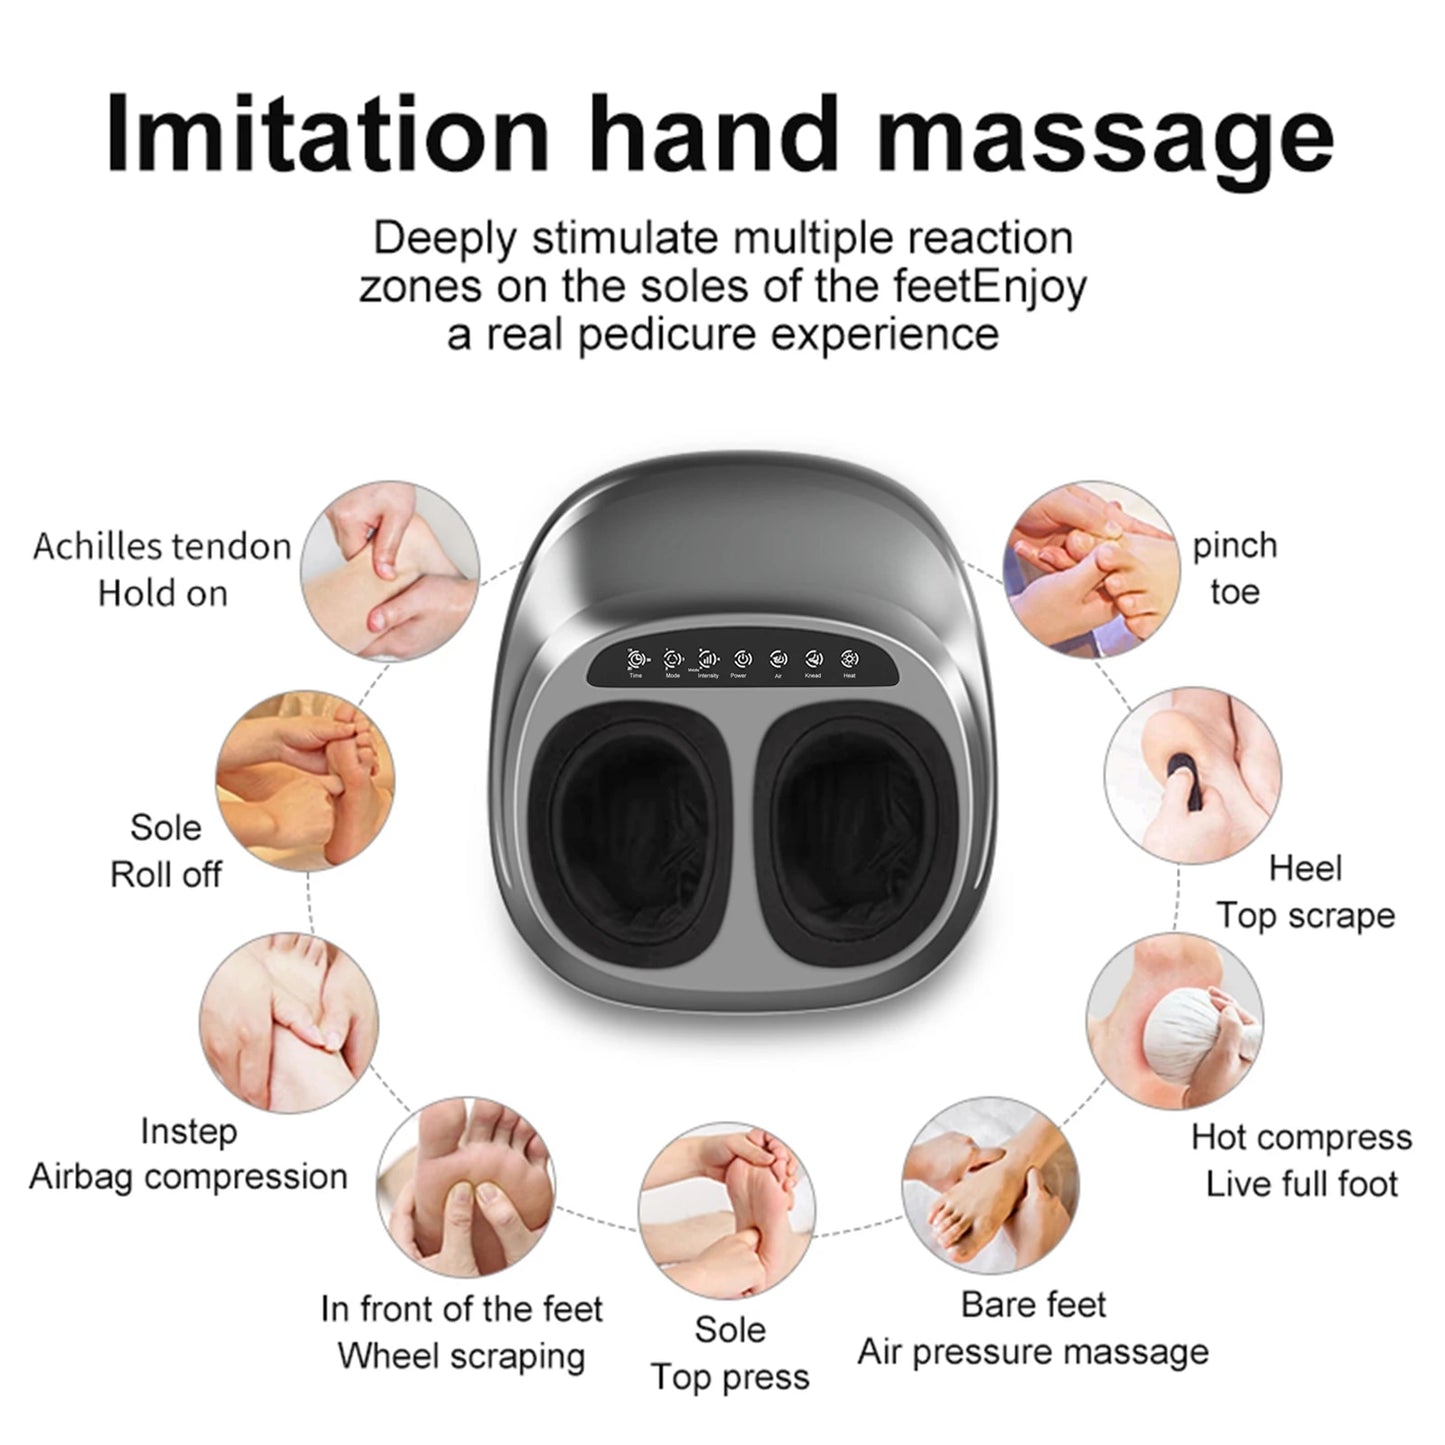 Foot Massager for Massage and Relaxation with Handheld Controller 3 Intensities Helps Relax Leg